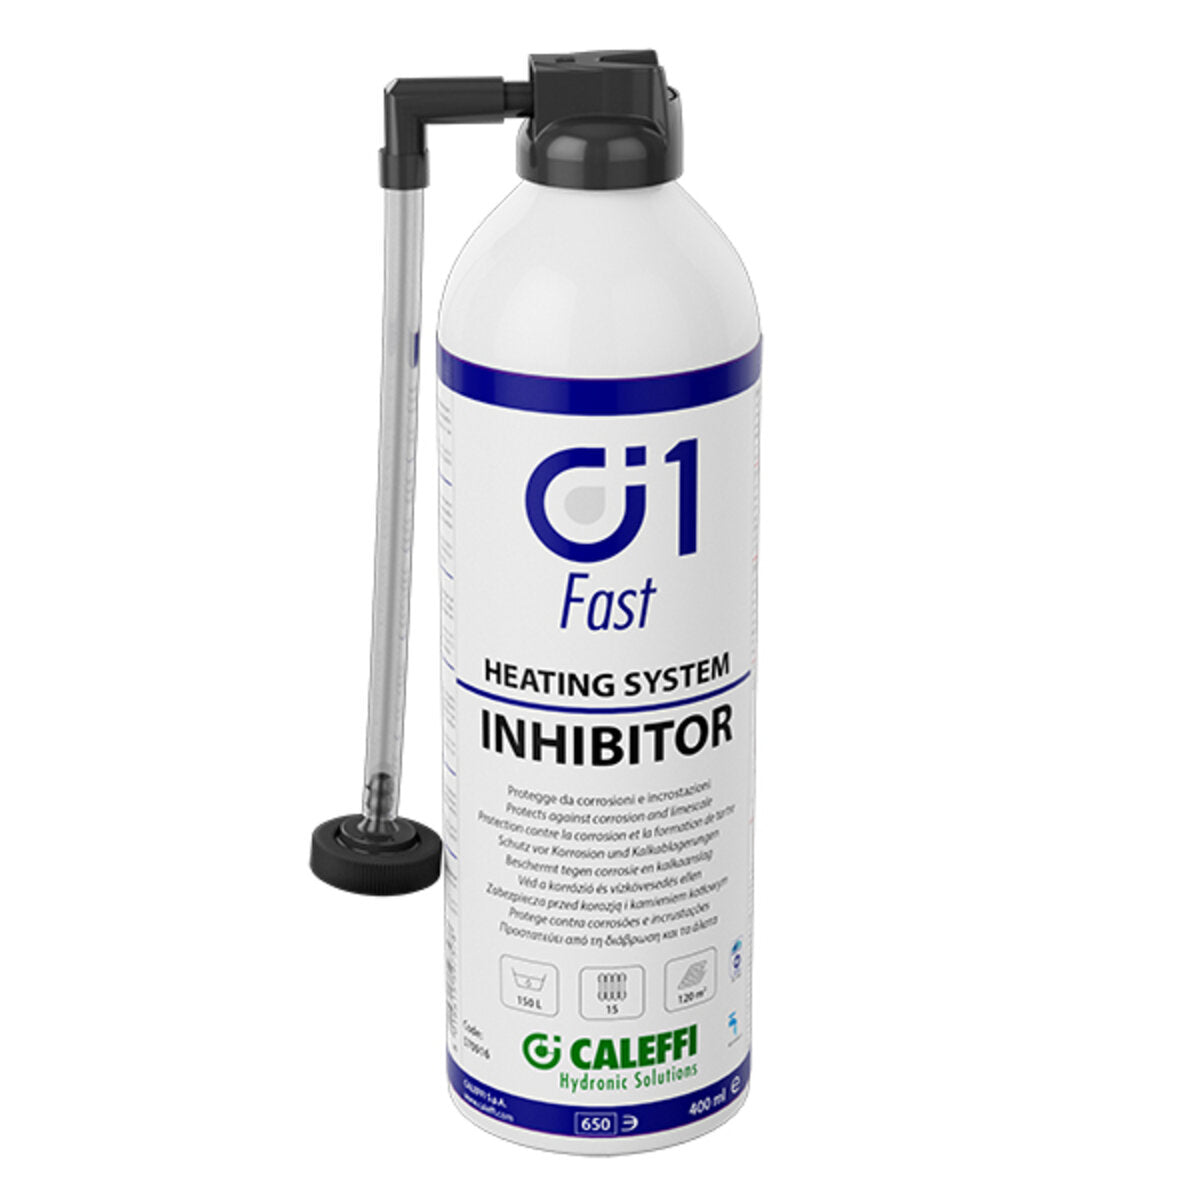 Caleffi c1 fast inhibitor anti-corrosion protector for heating and cooling systems